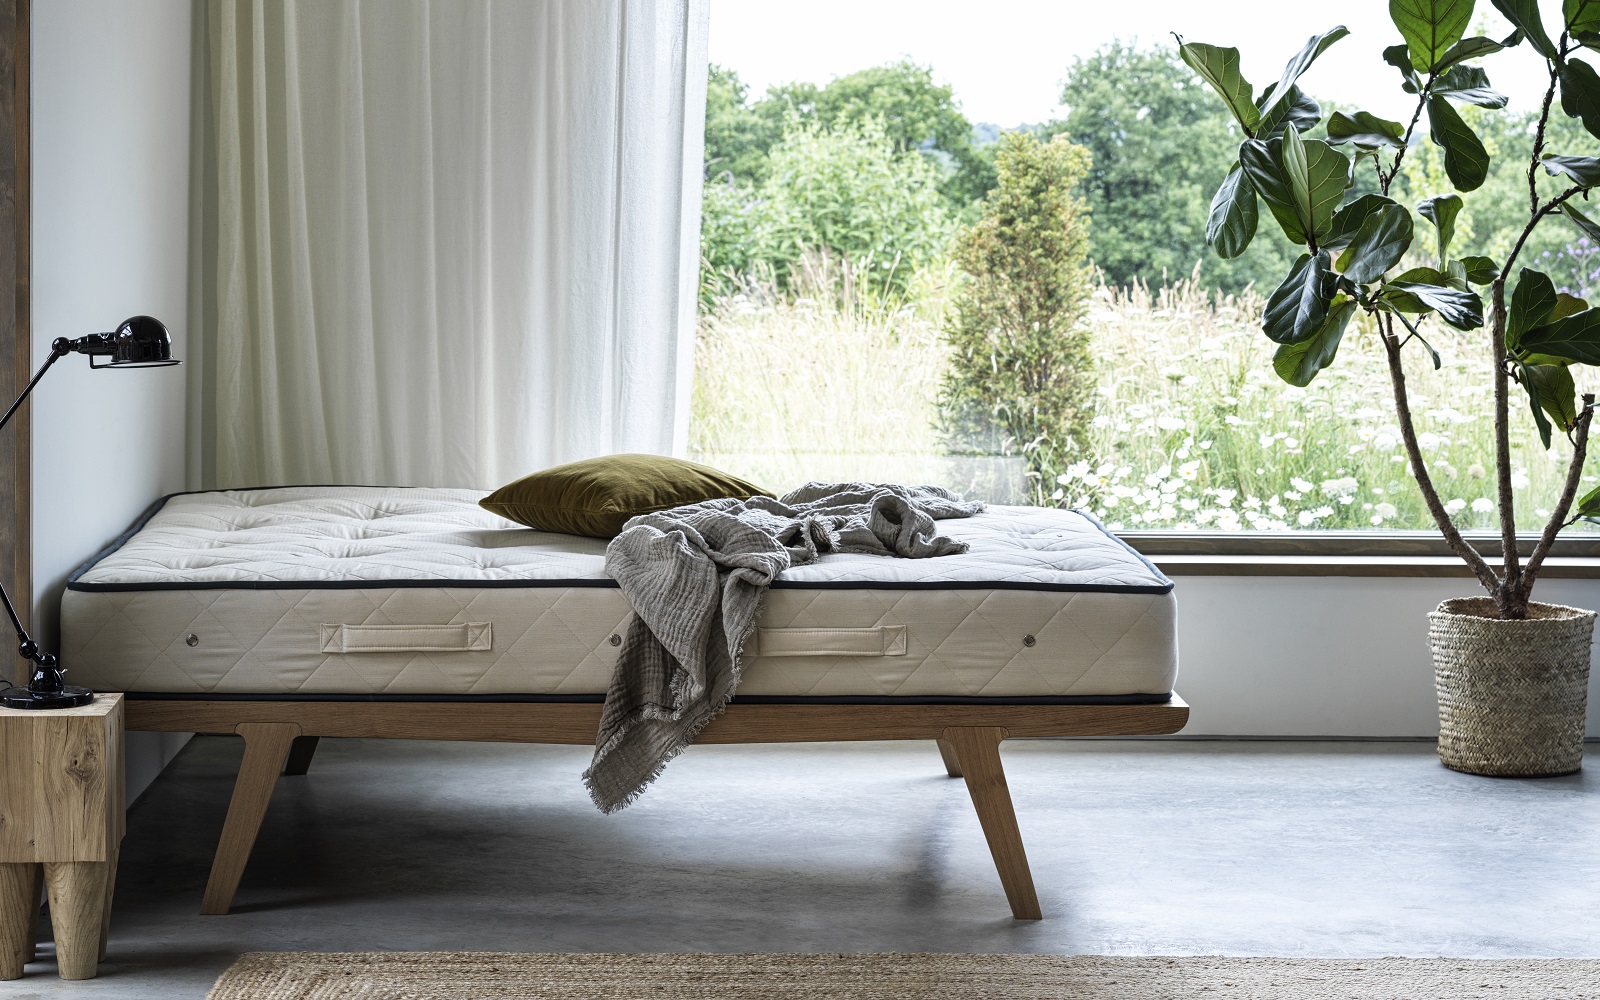 An unmade bed in front of window and countryside